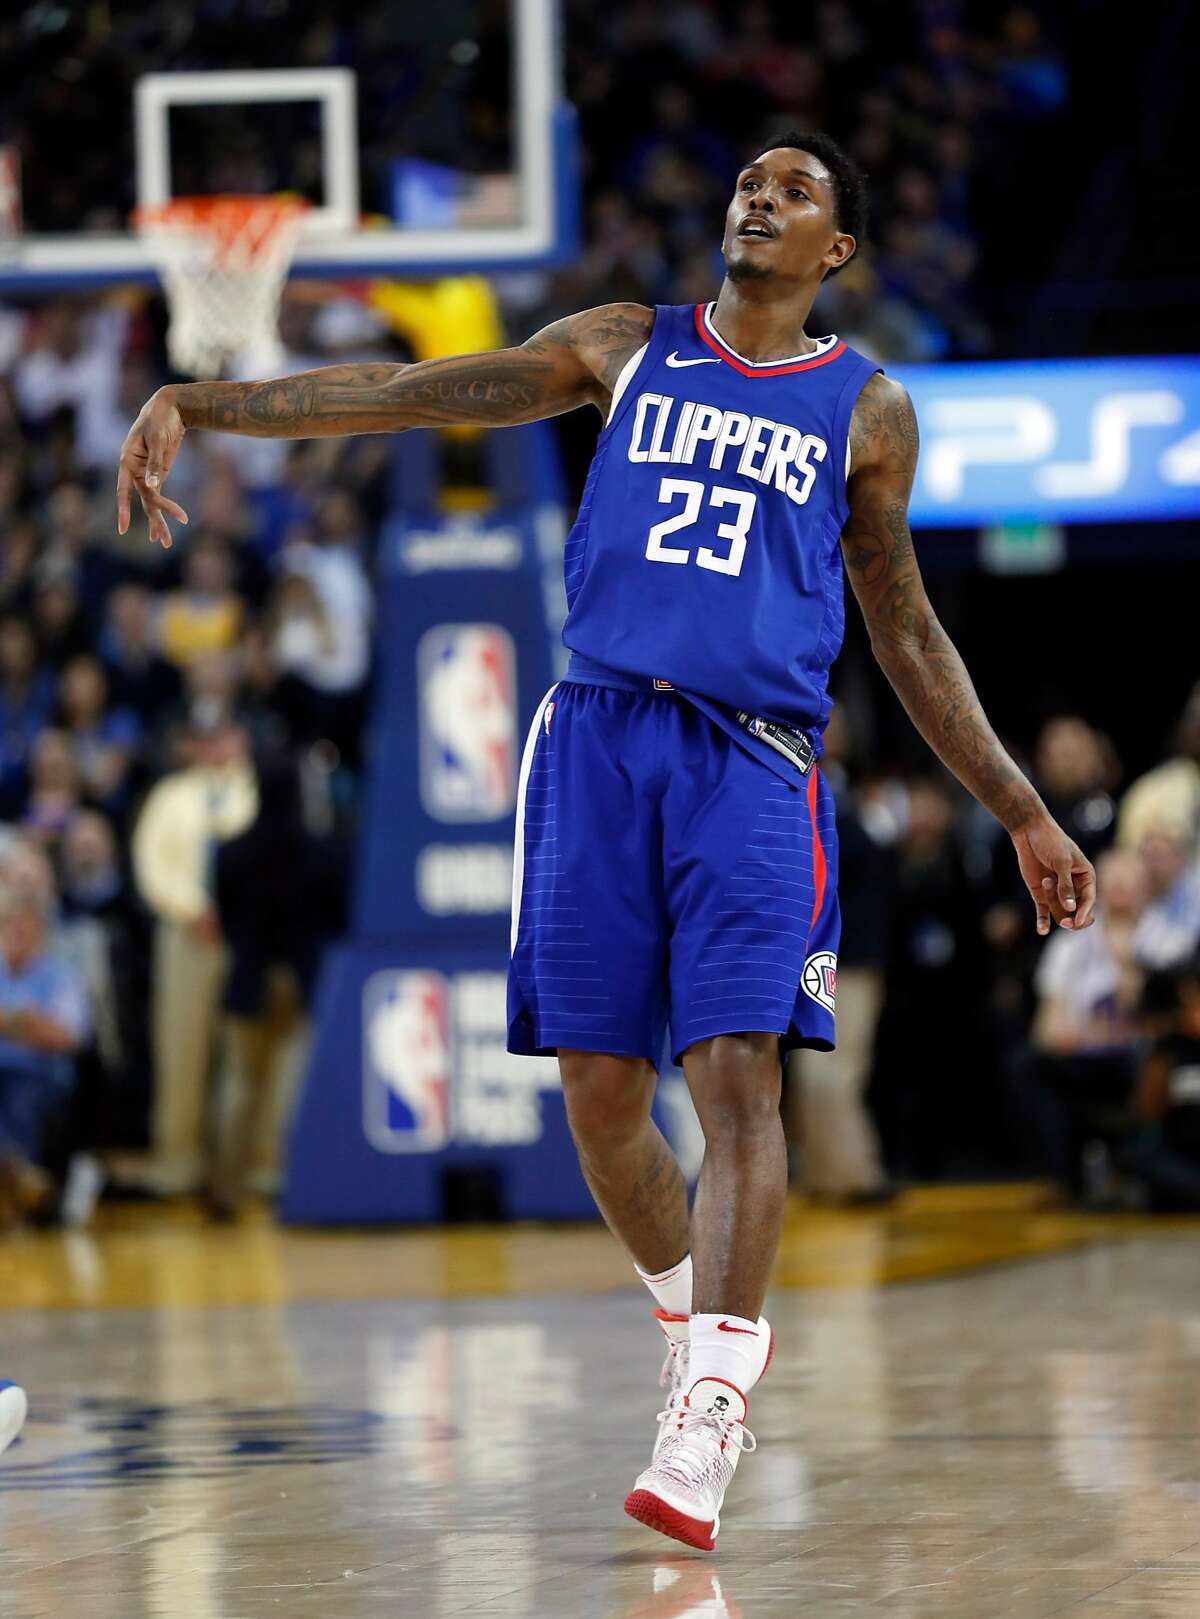 Los Angeles Clippers' Lou Williams watches his successful 3-pointer in 3rd quarter of Clippers' 125-106 win over Golden State Warriors in NBA game at Oracle Arena in Oakland, Calif., on Wednesday, January 10, 2018.